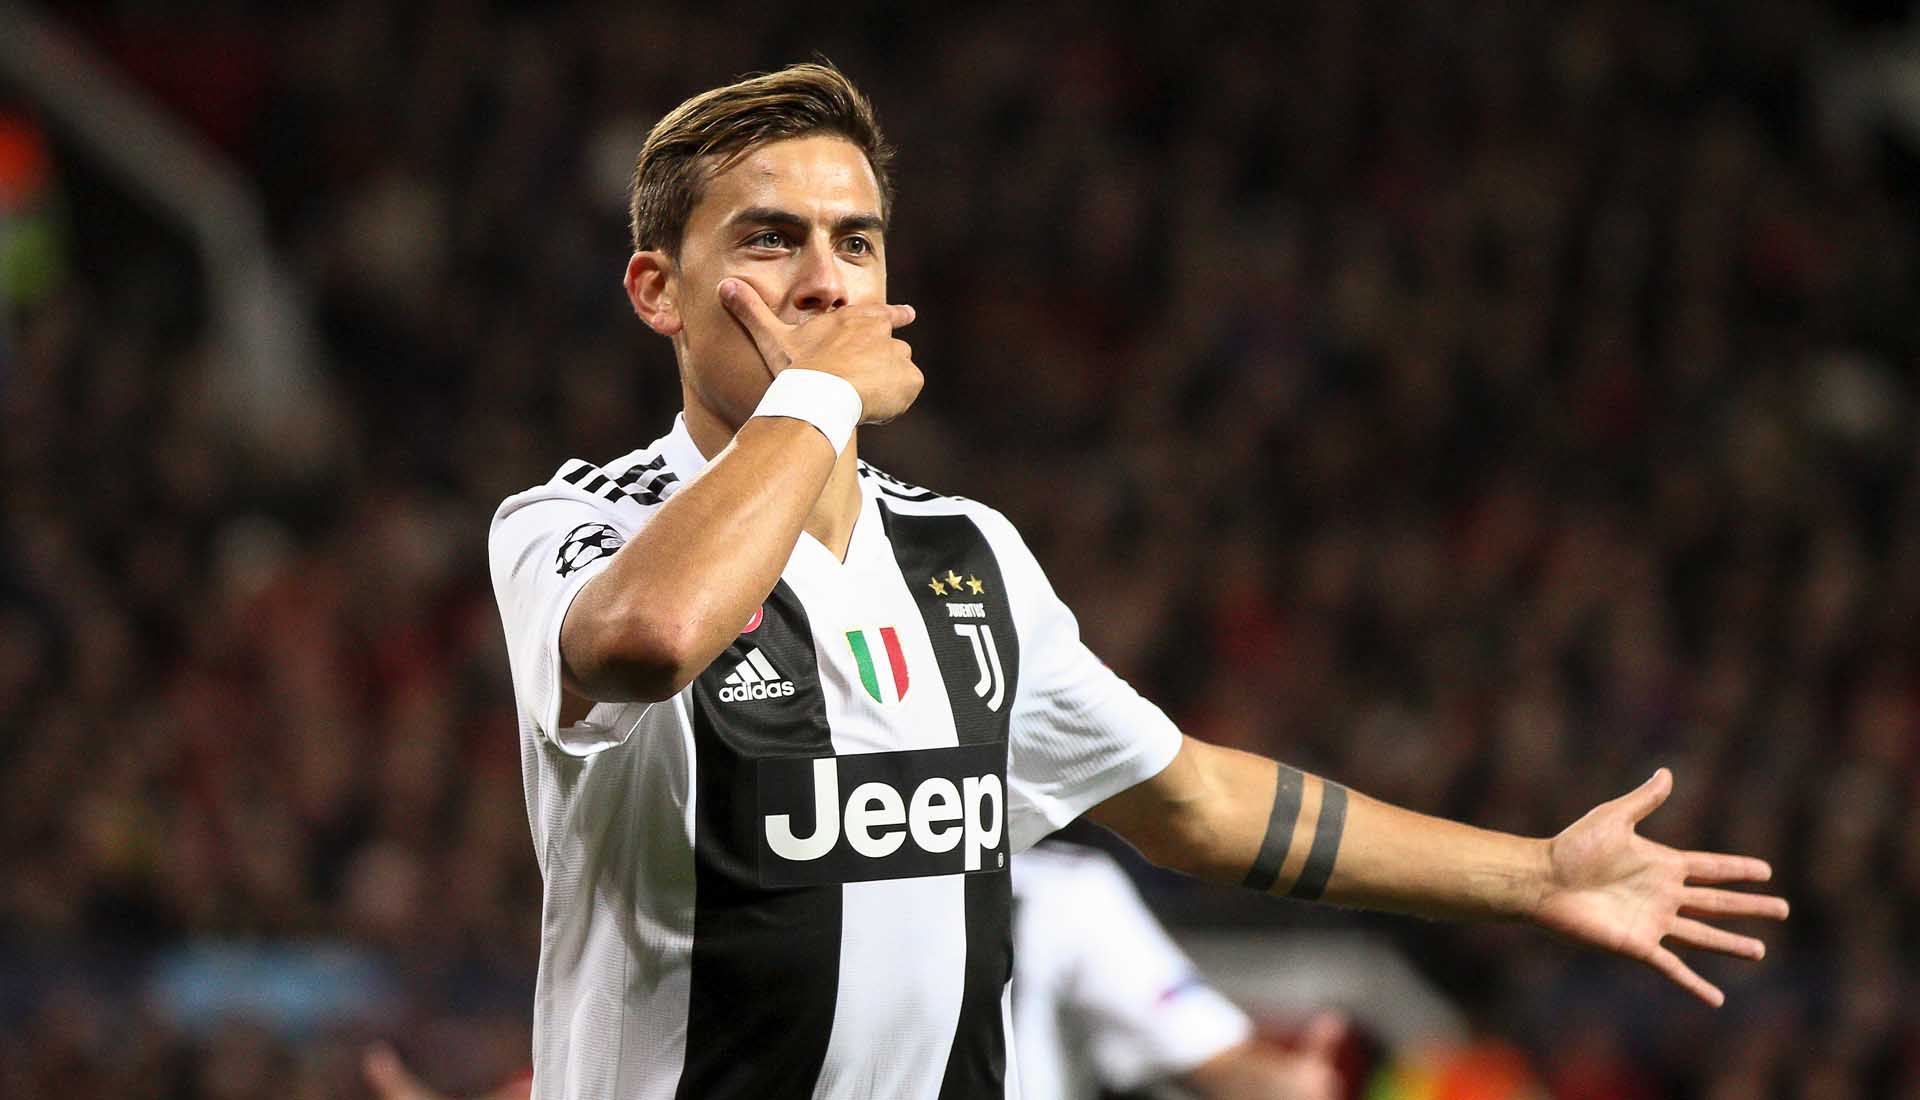 Paulo Dybala has been sensational for Juventus in the last couple of years. 